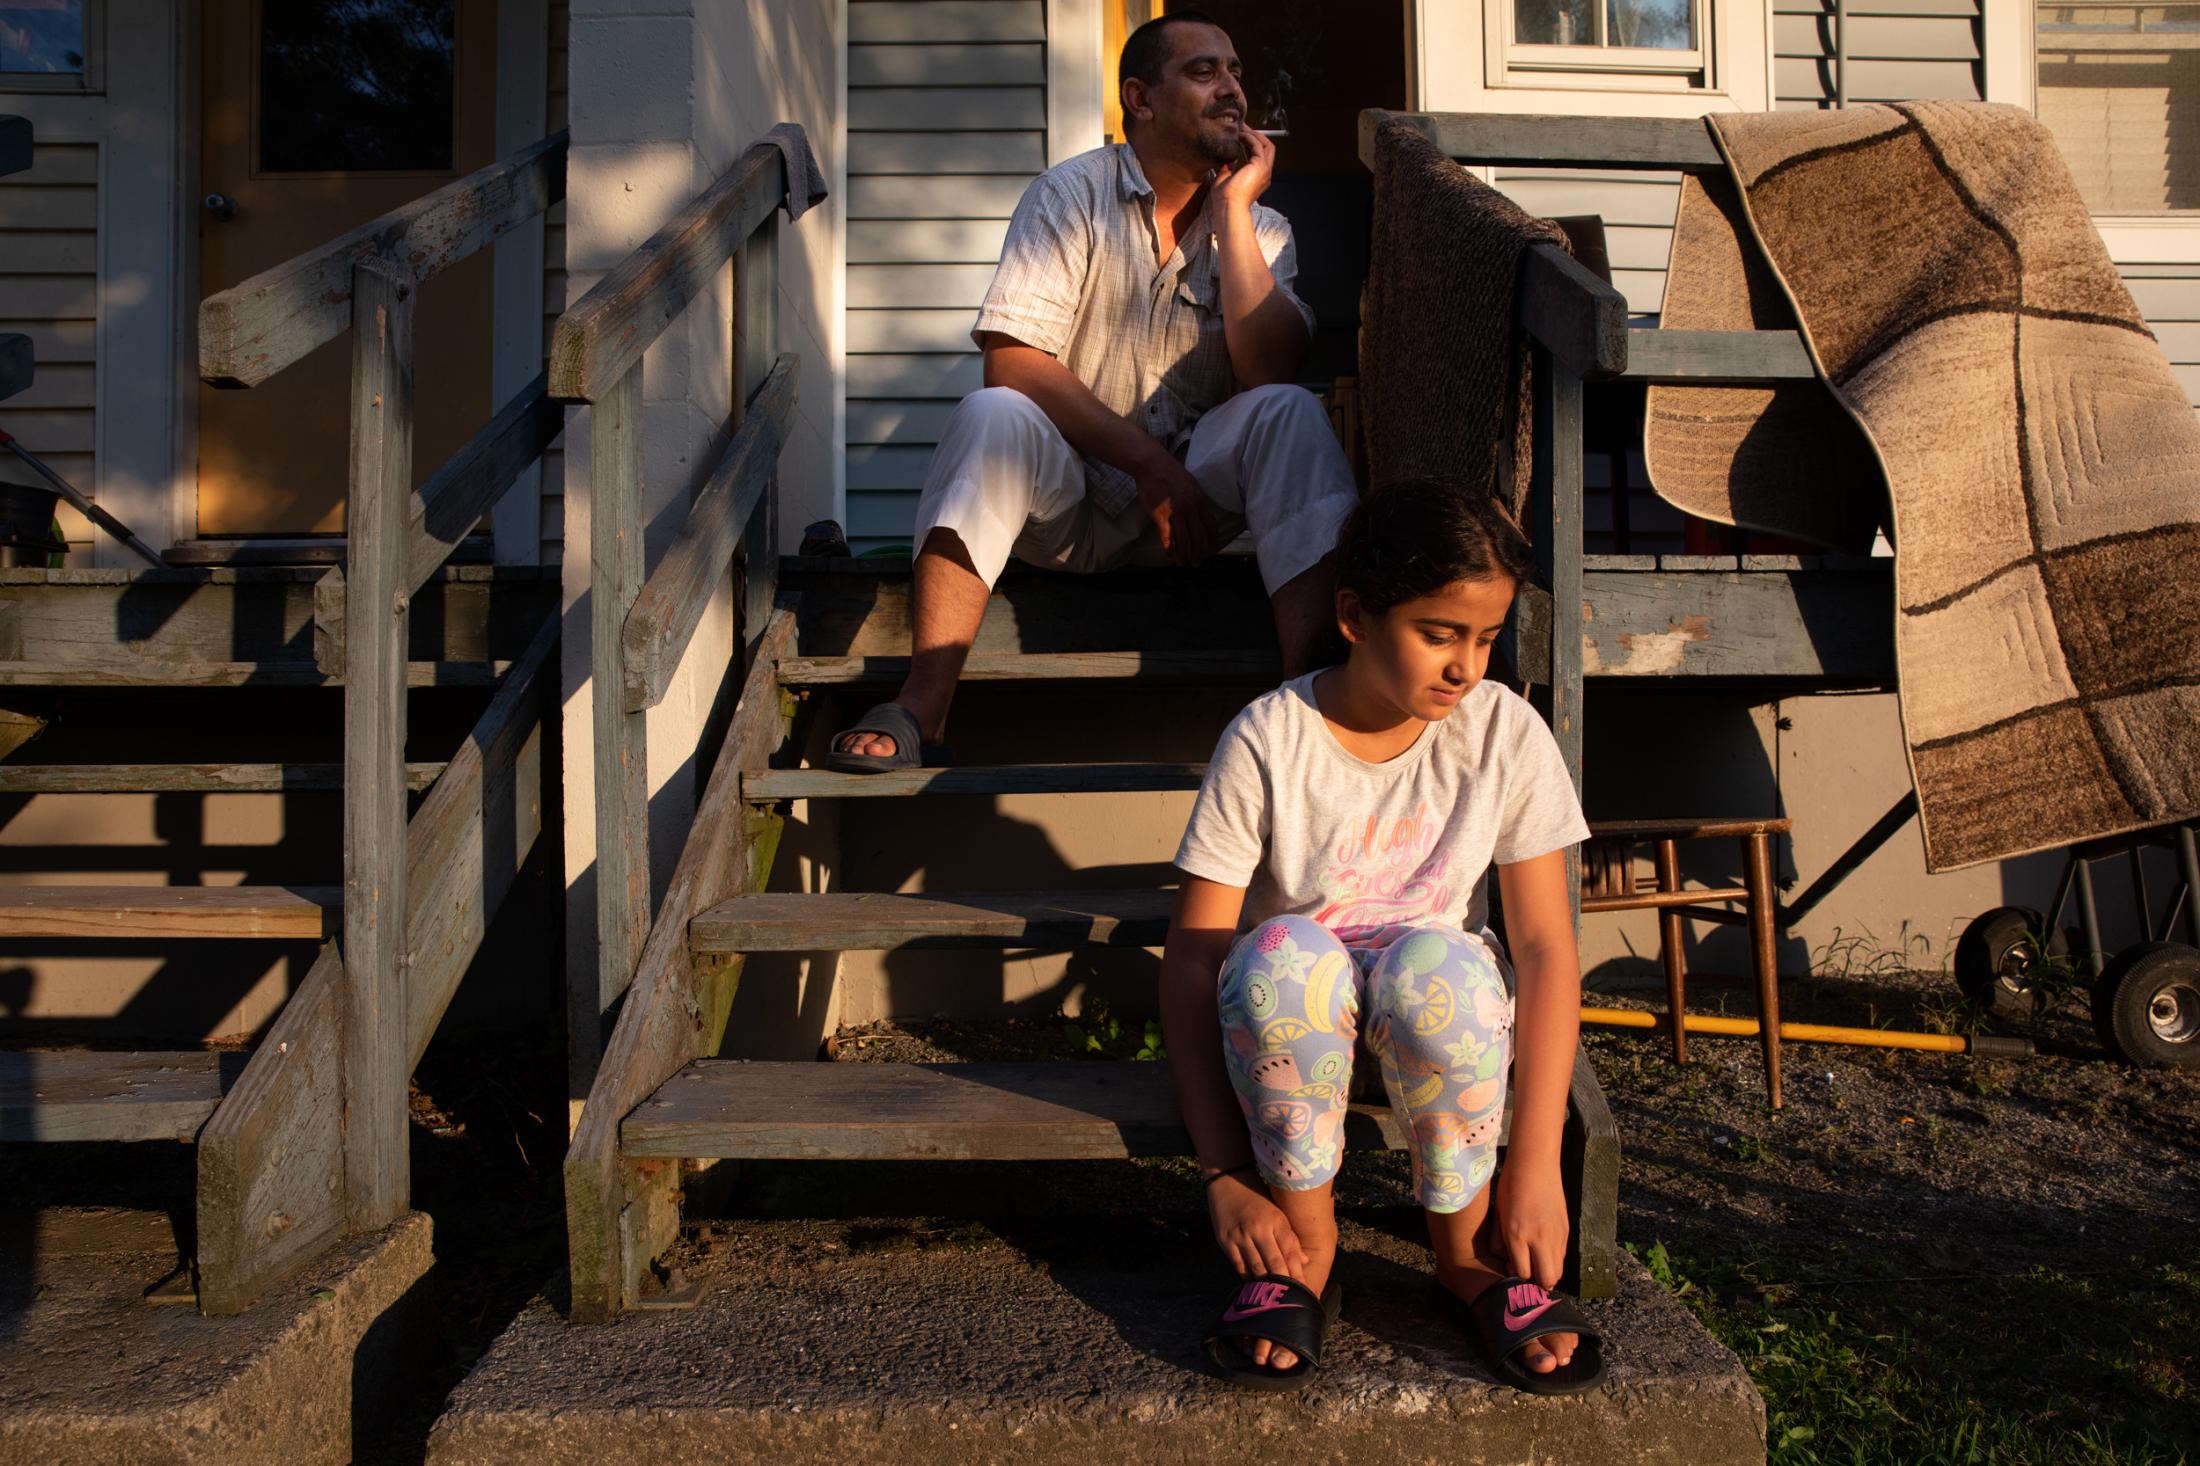 Belonging - Fatima and her dad, originally from Iran, sit outside...